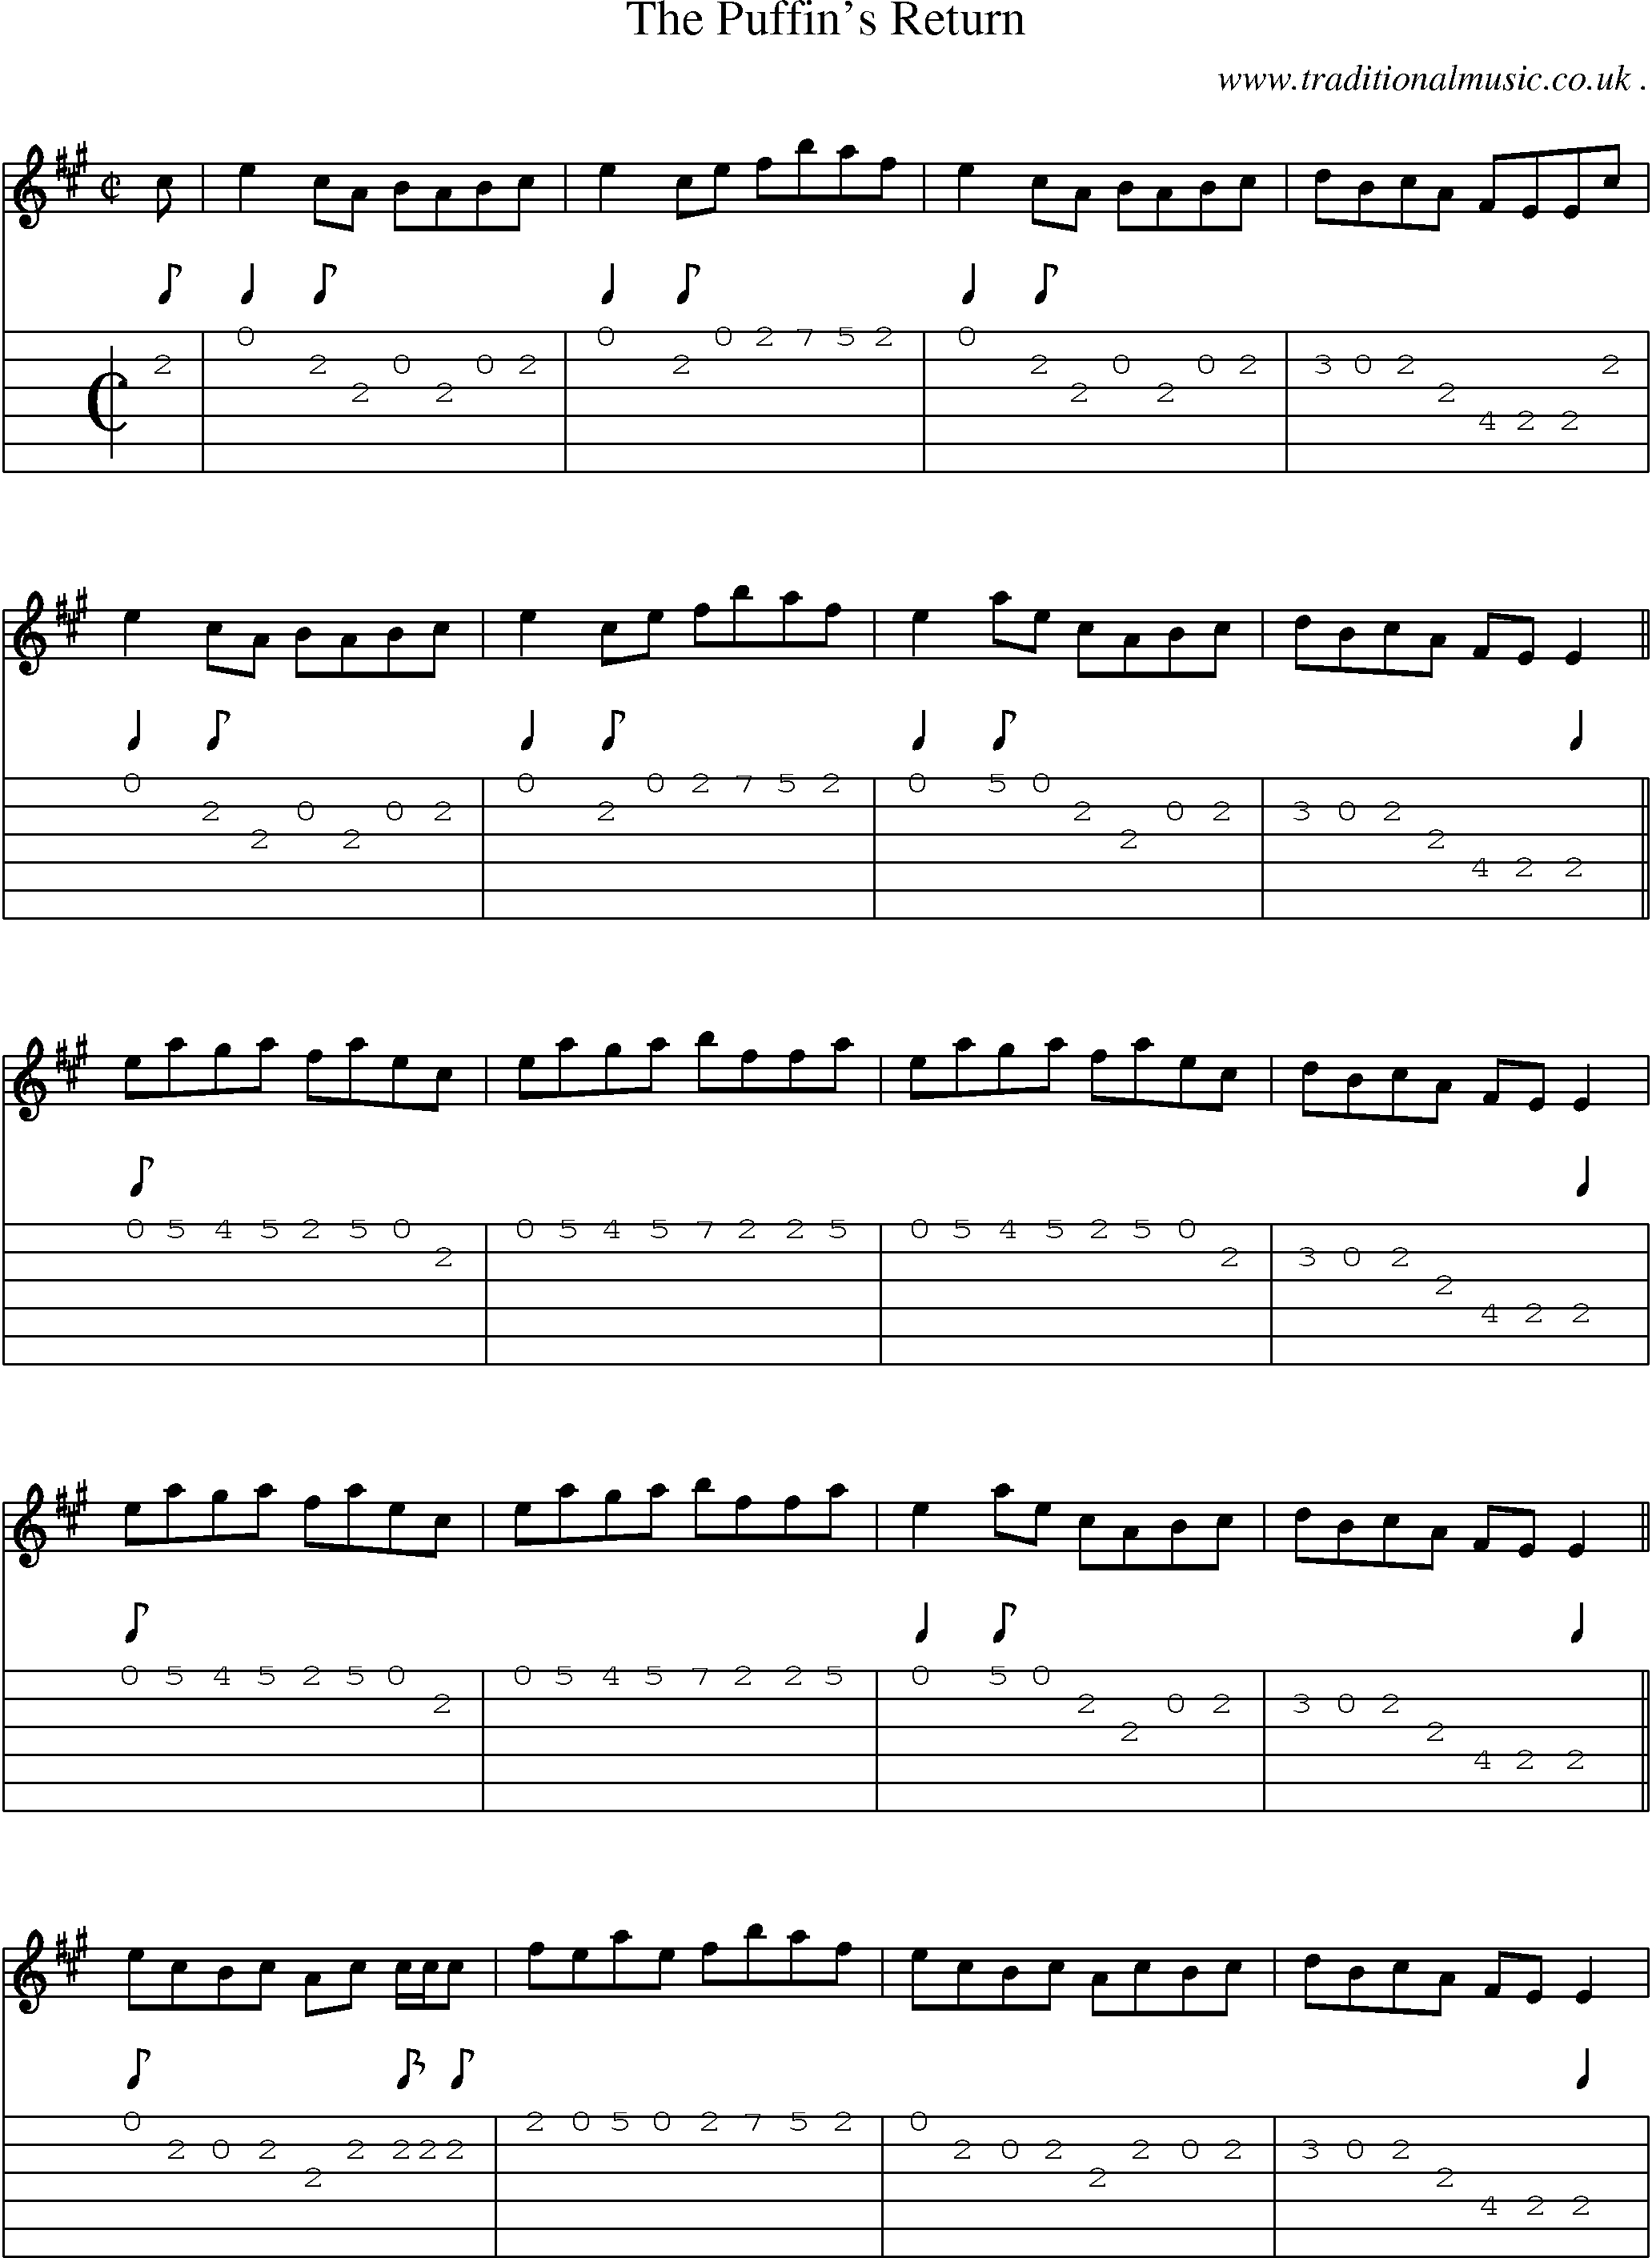 Sheet-Music and Guitar Tabs for The Puffins Return